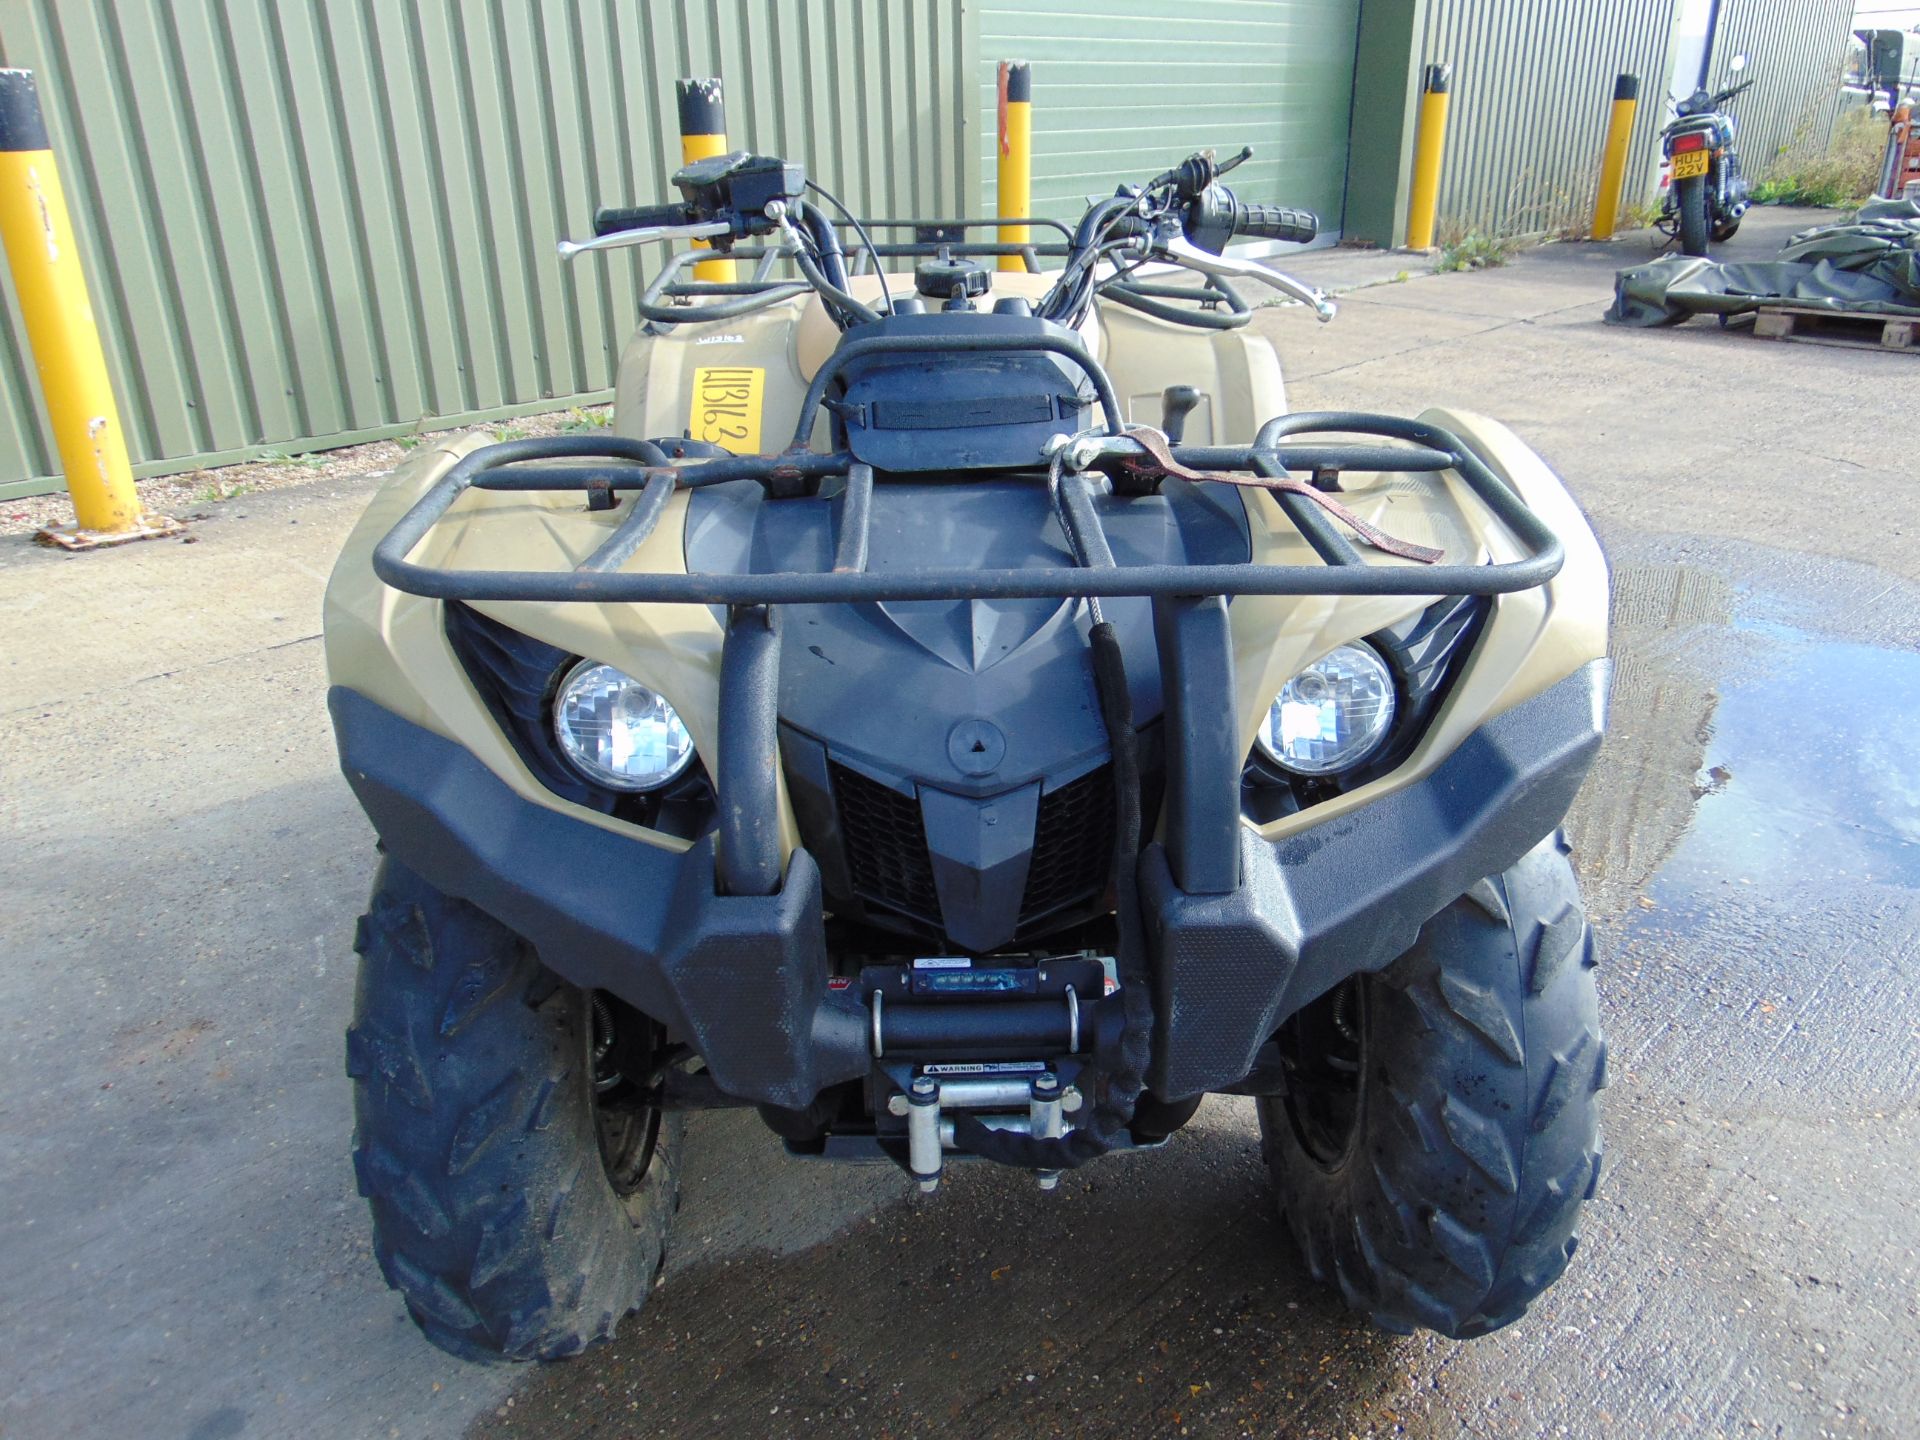 Military Specification Yamaha Grizzly 450 4 x 4 ATV Quad Bike ONLY 214 HOURS!!! - Image 2 of 22